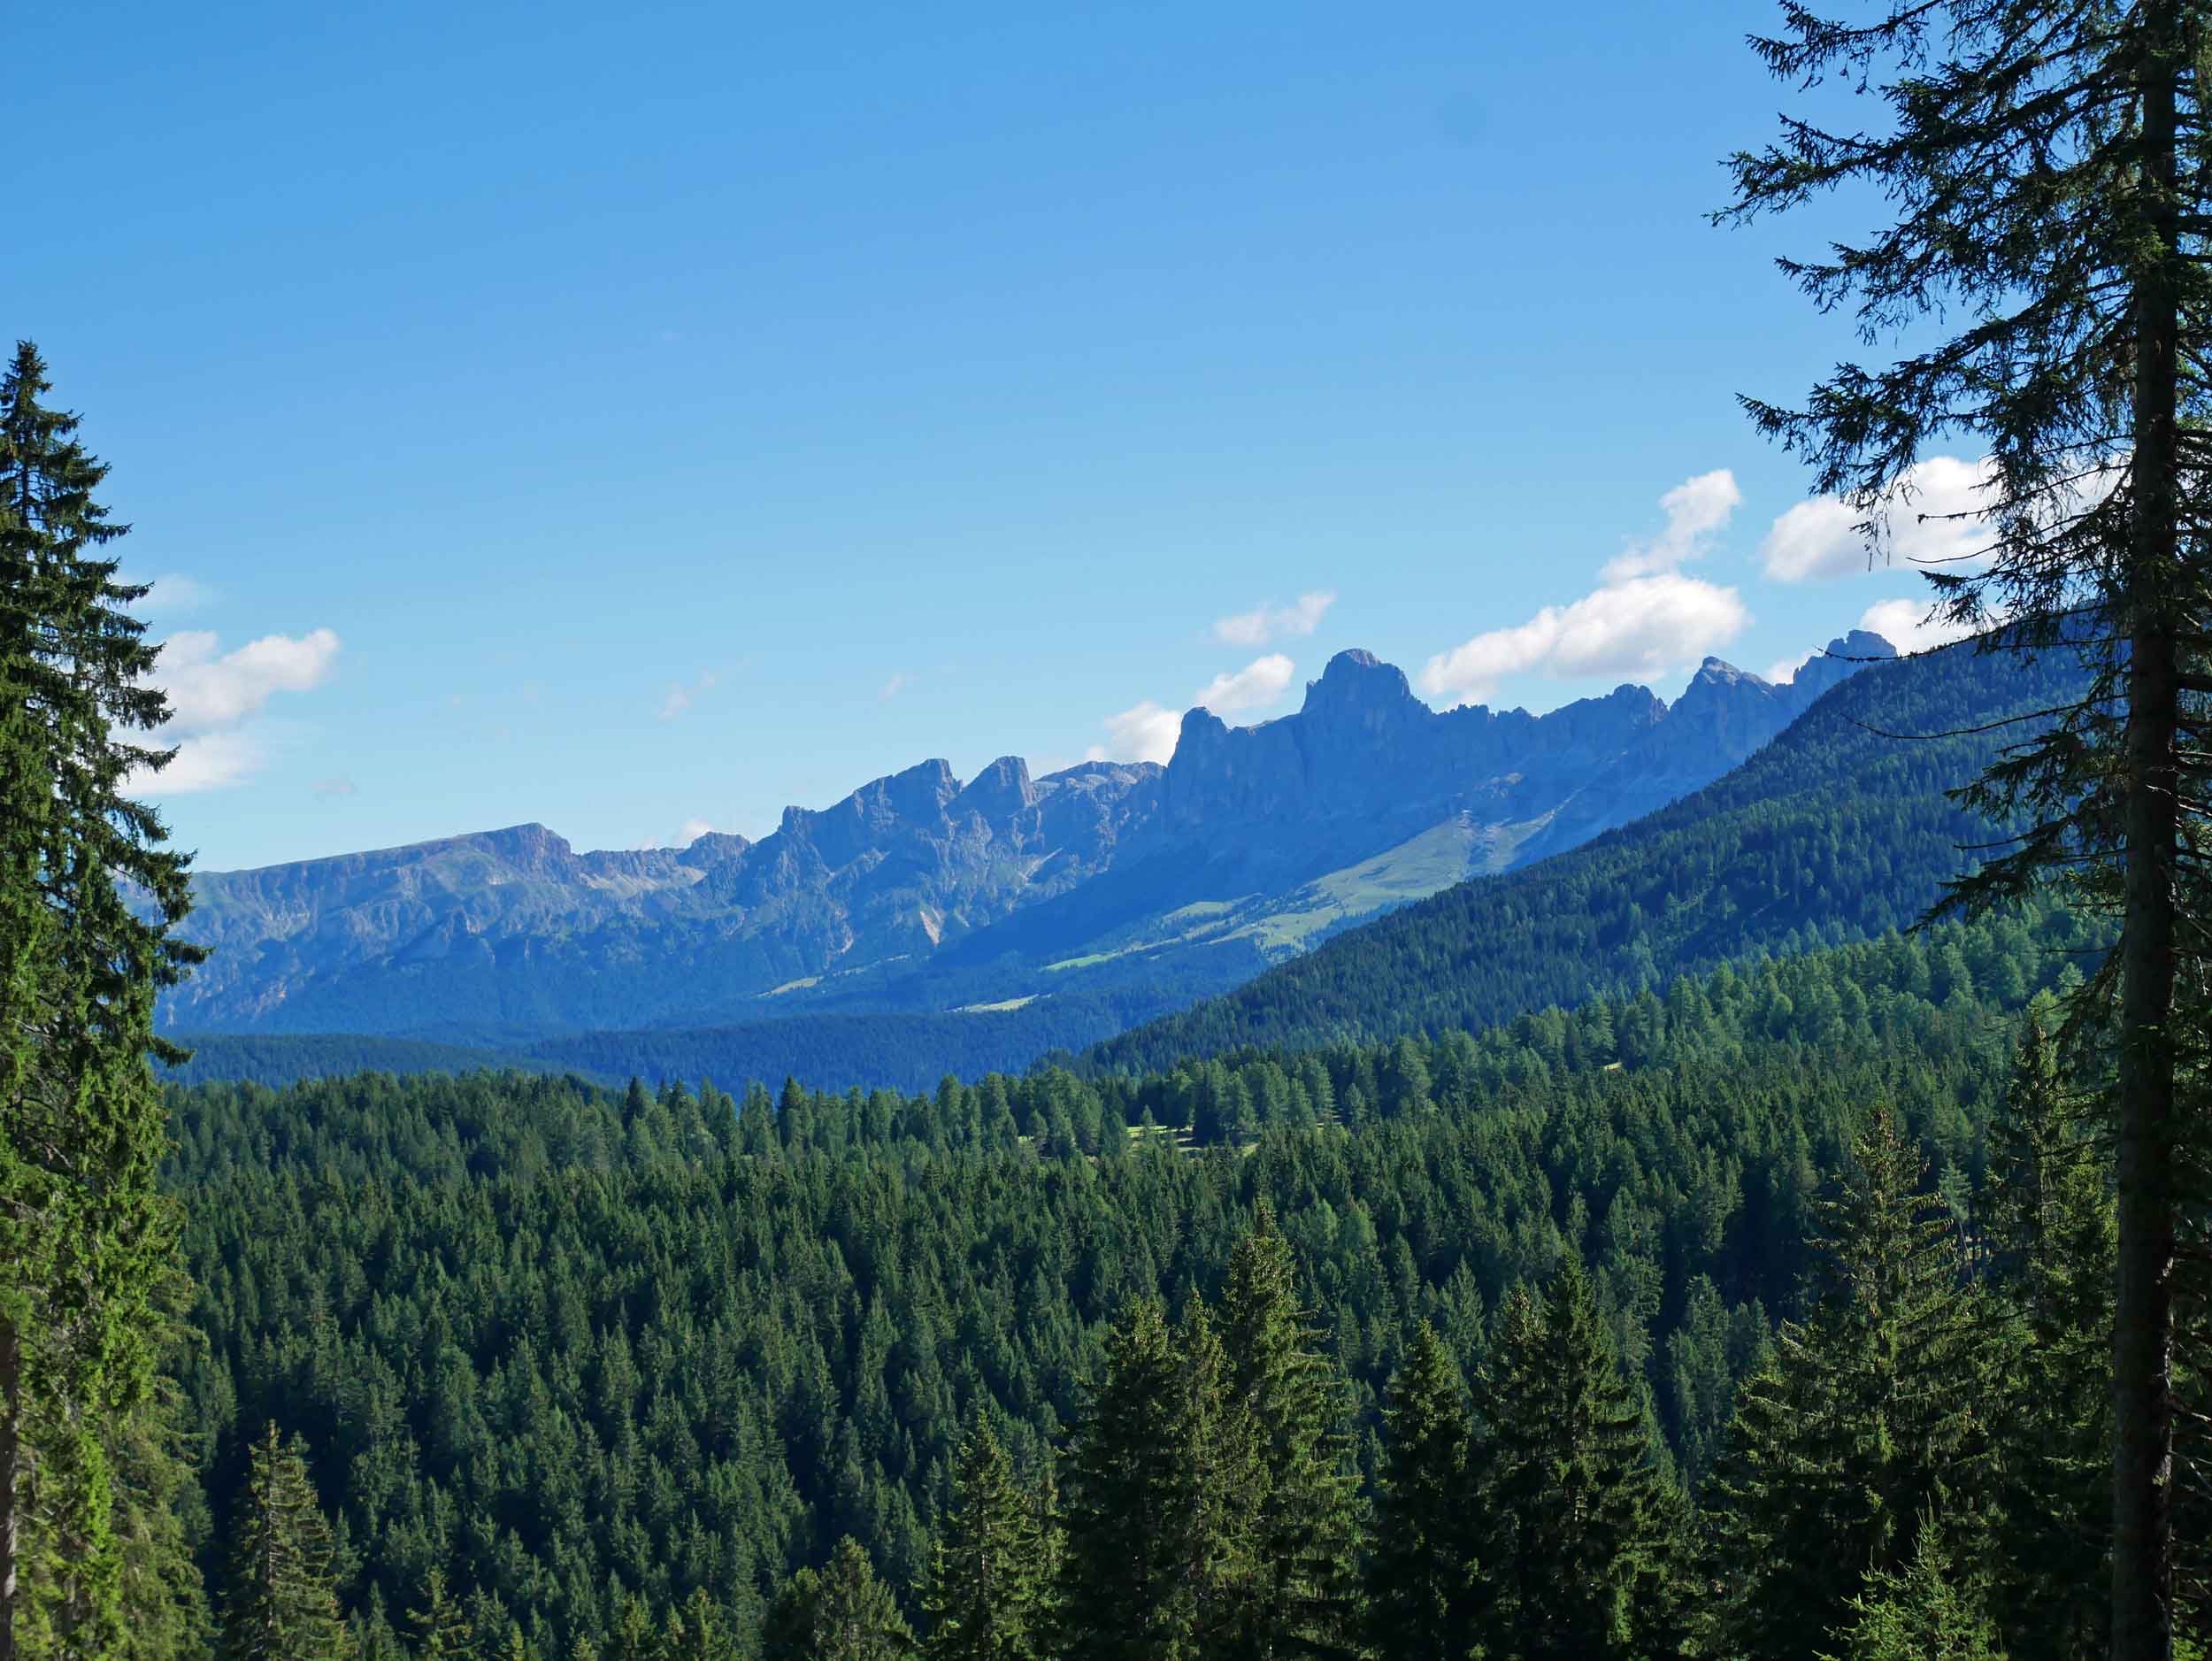  The next day, we hiked in the Forest di Fiemme with offered stunning views of the Fiemme range (July 25). 